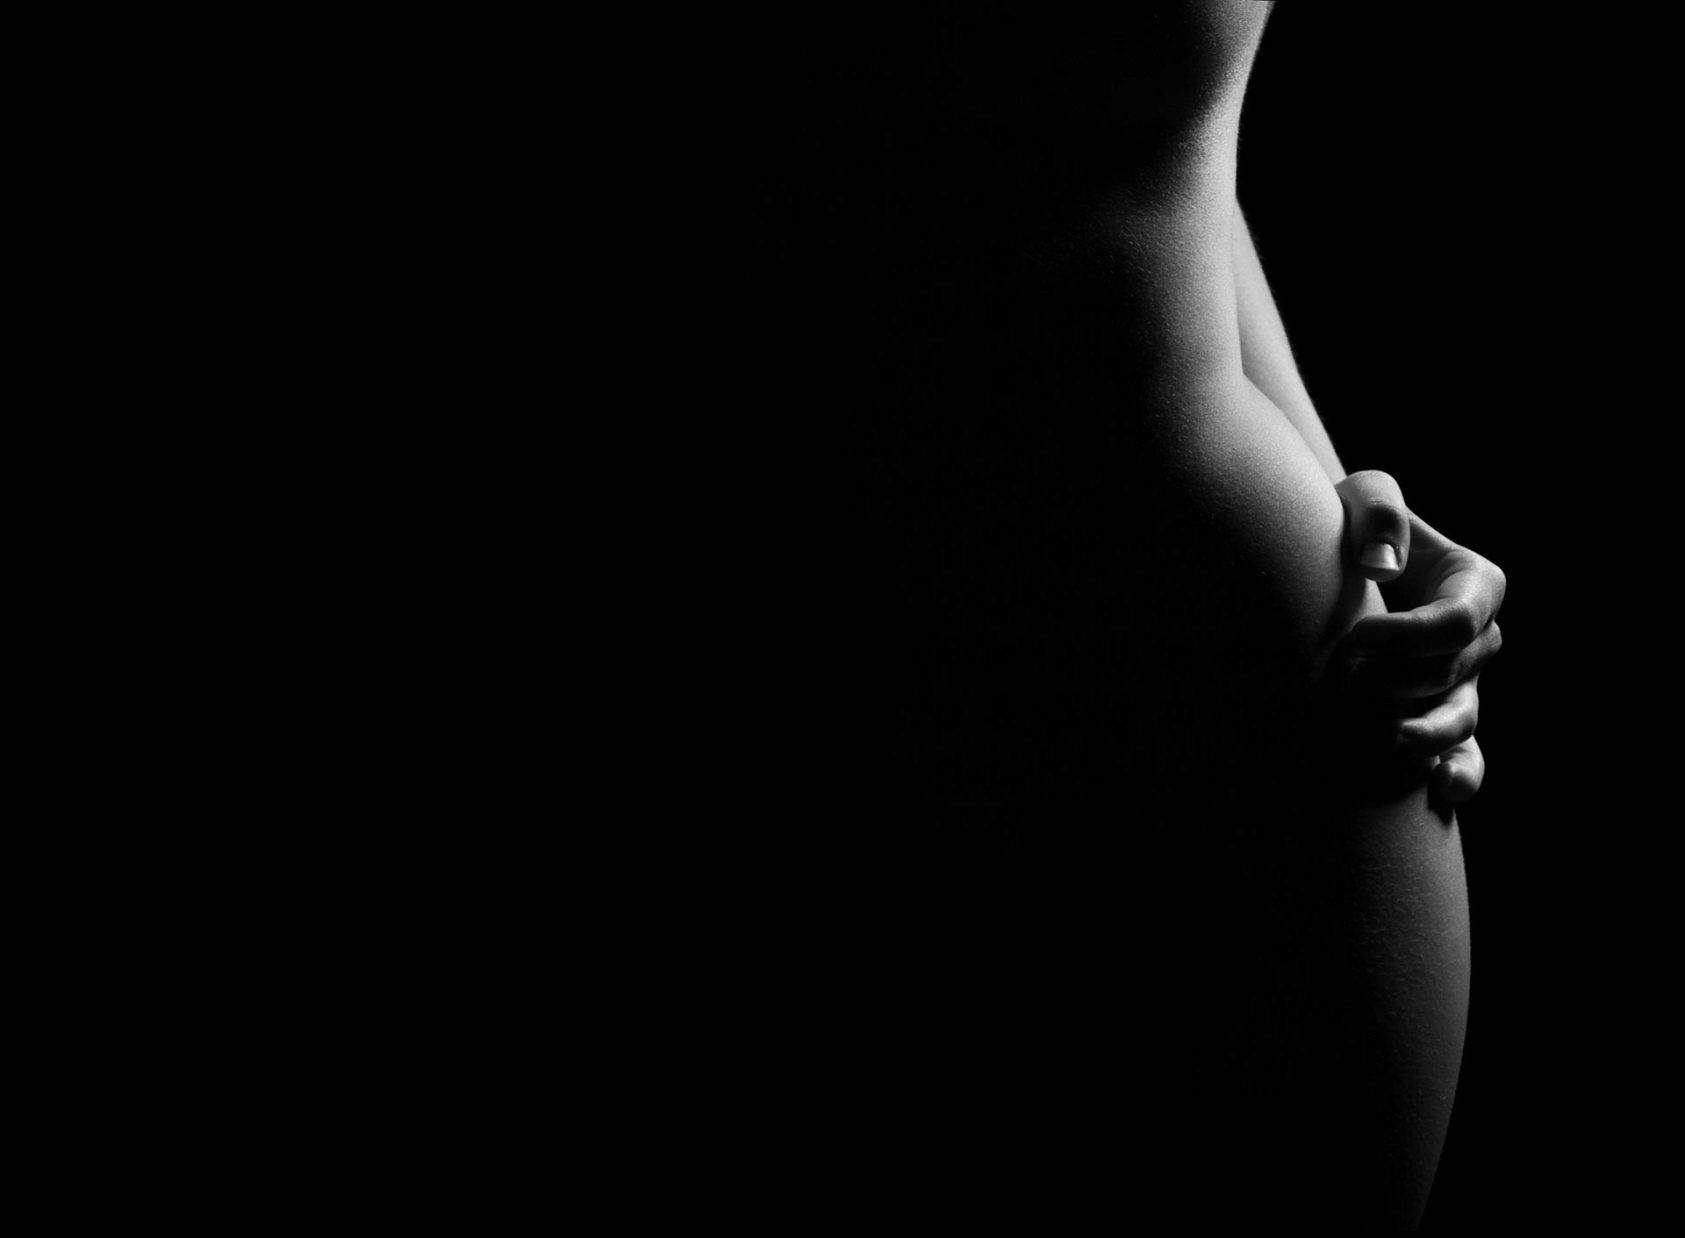 Cam Being Totally Naked - High Contrast Nude Photography - How to light and...